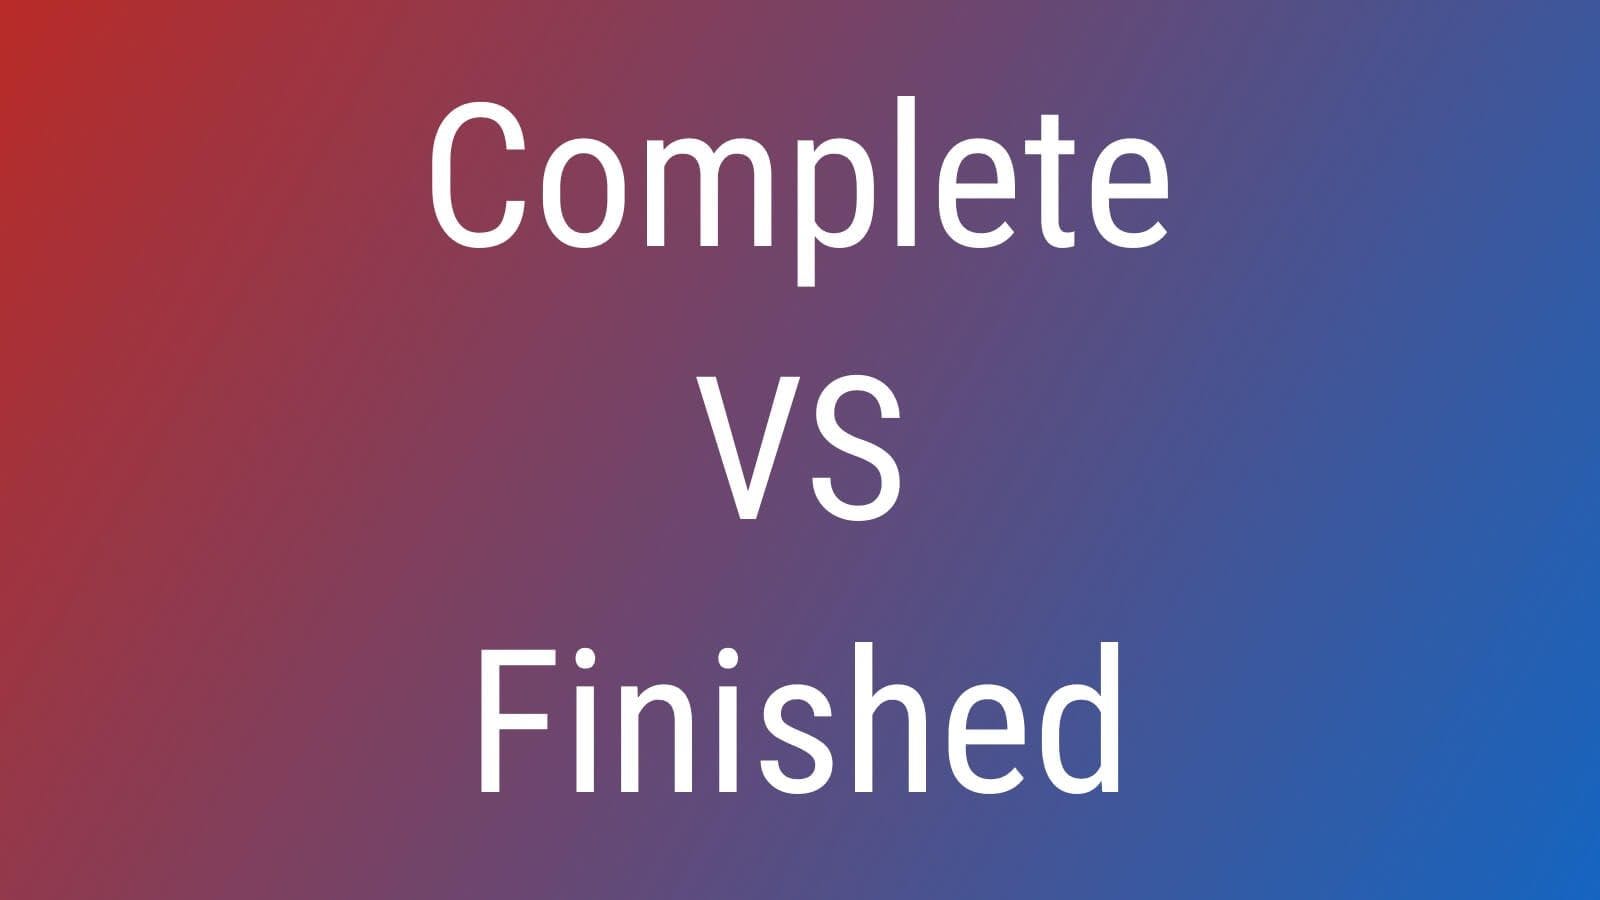 complet_vs_finished_2a7f716b21.jpg